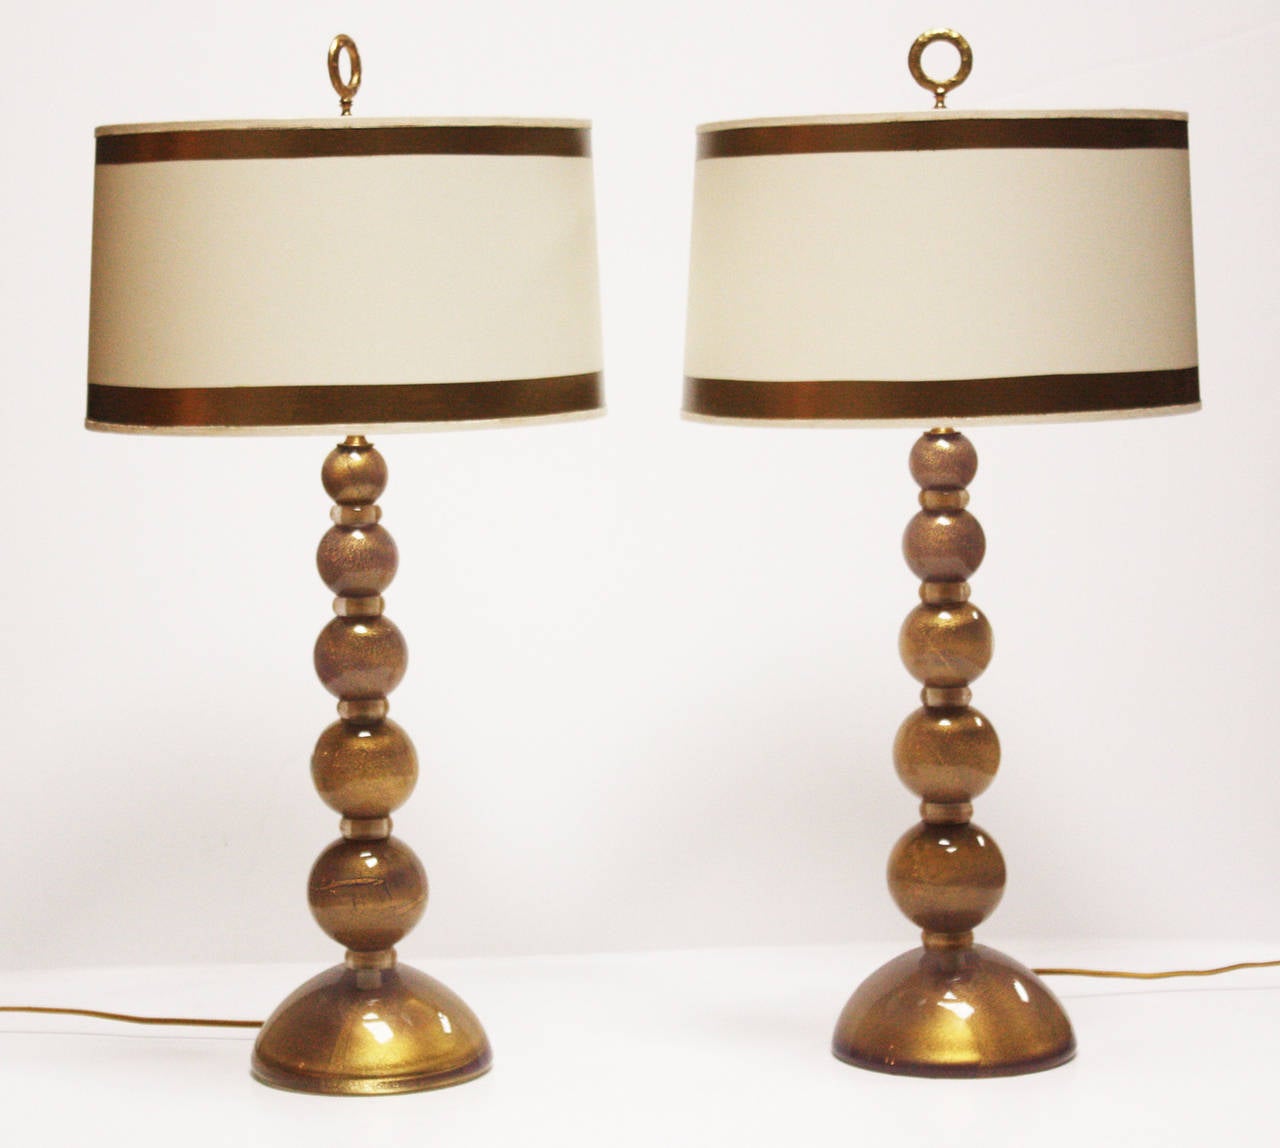 Pair of Mid-Century handblown Murano glass lamps in stack design. The larger elements are crafted of heavily gold infused paperweight glass in shades of lavender to light purple. The separators are crafted of clear glass also with gold inclusions.